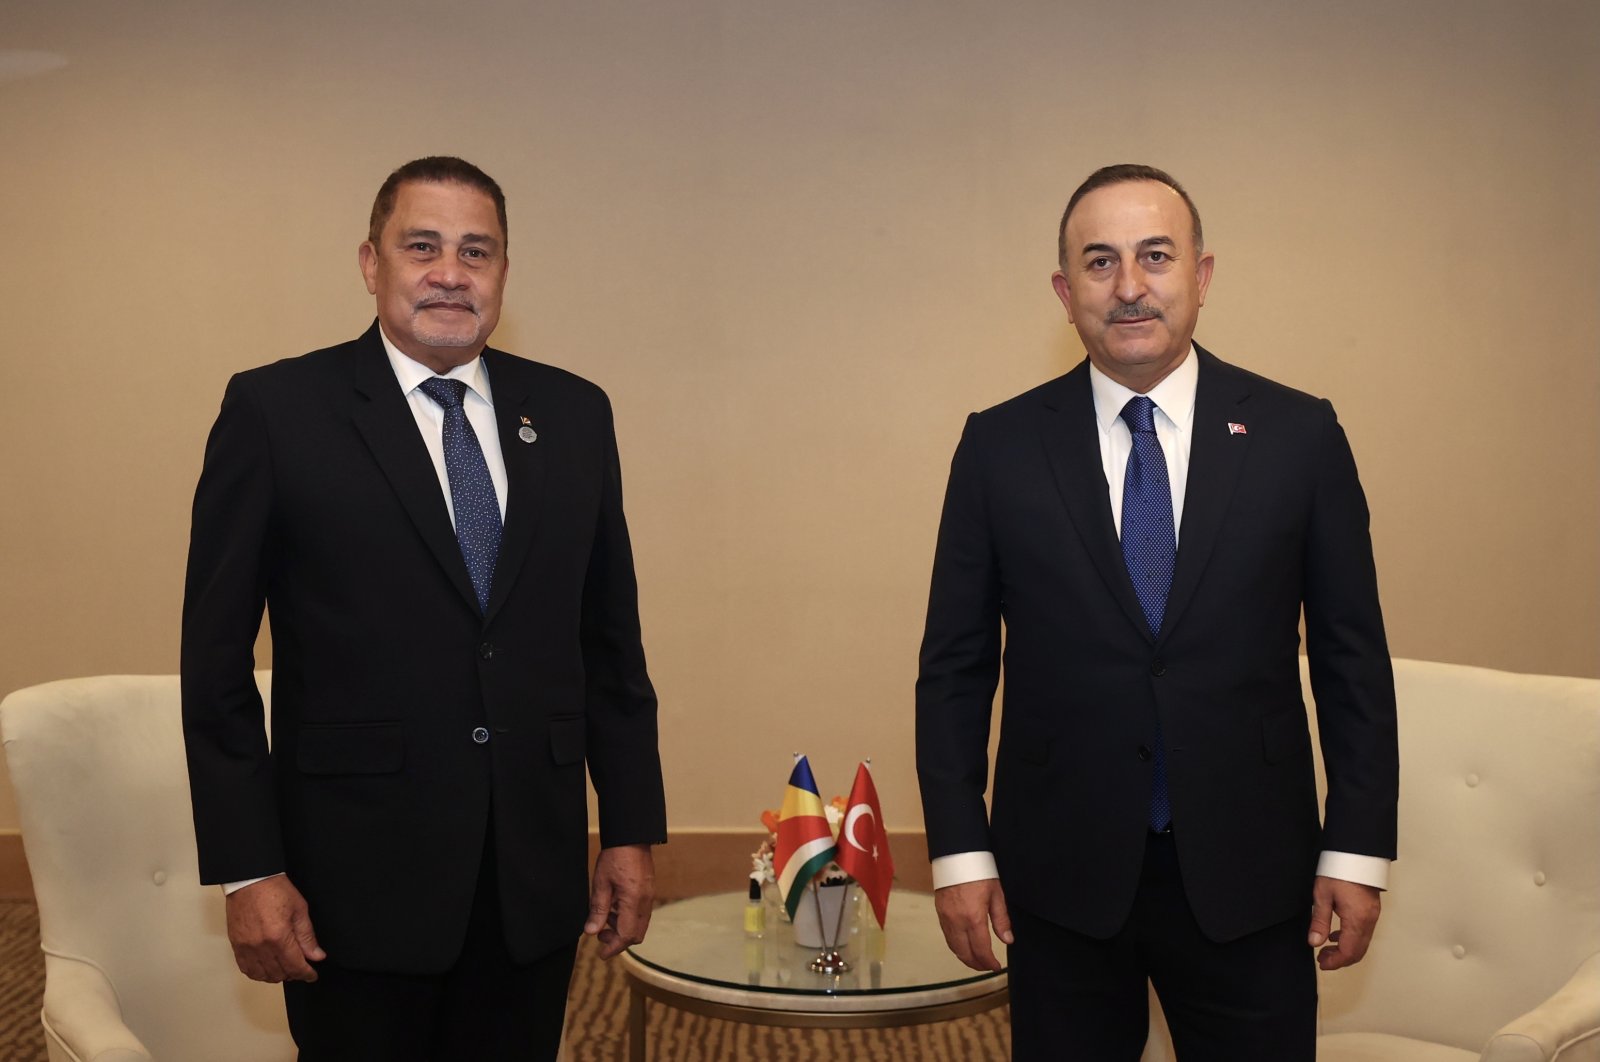 The Seychelles Foreign and Tourism Minister Sylvestre Radegonde (L) and Foreign Minister Mevlüt Çavuşoğlu in Antalya, Turkey, March 11, 2022 (AA Photo)